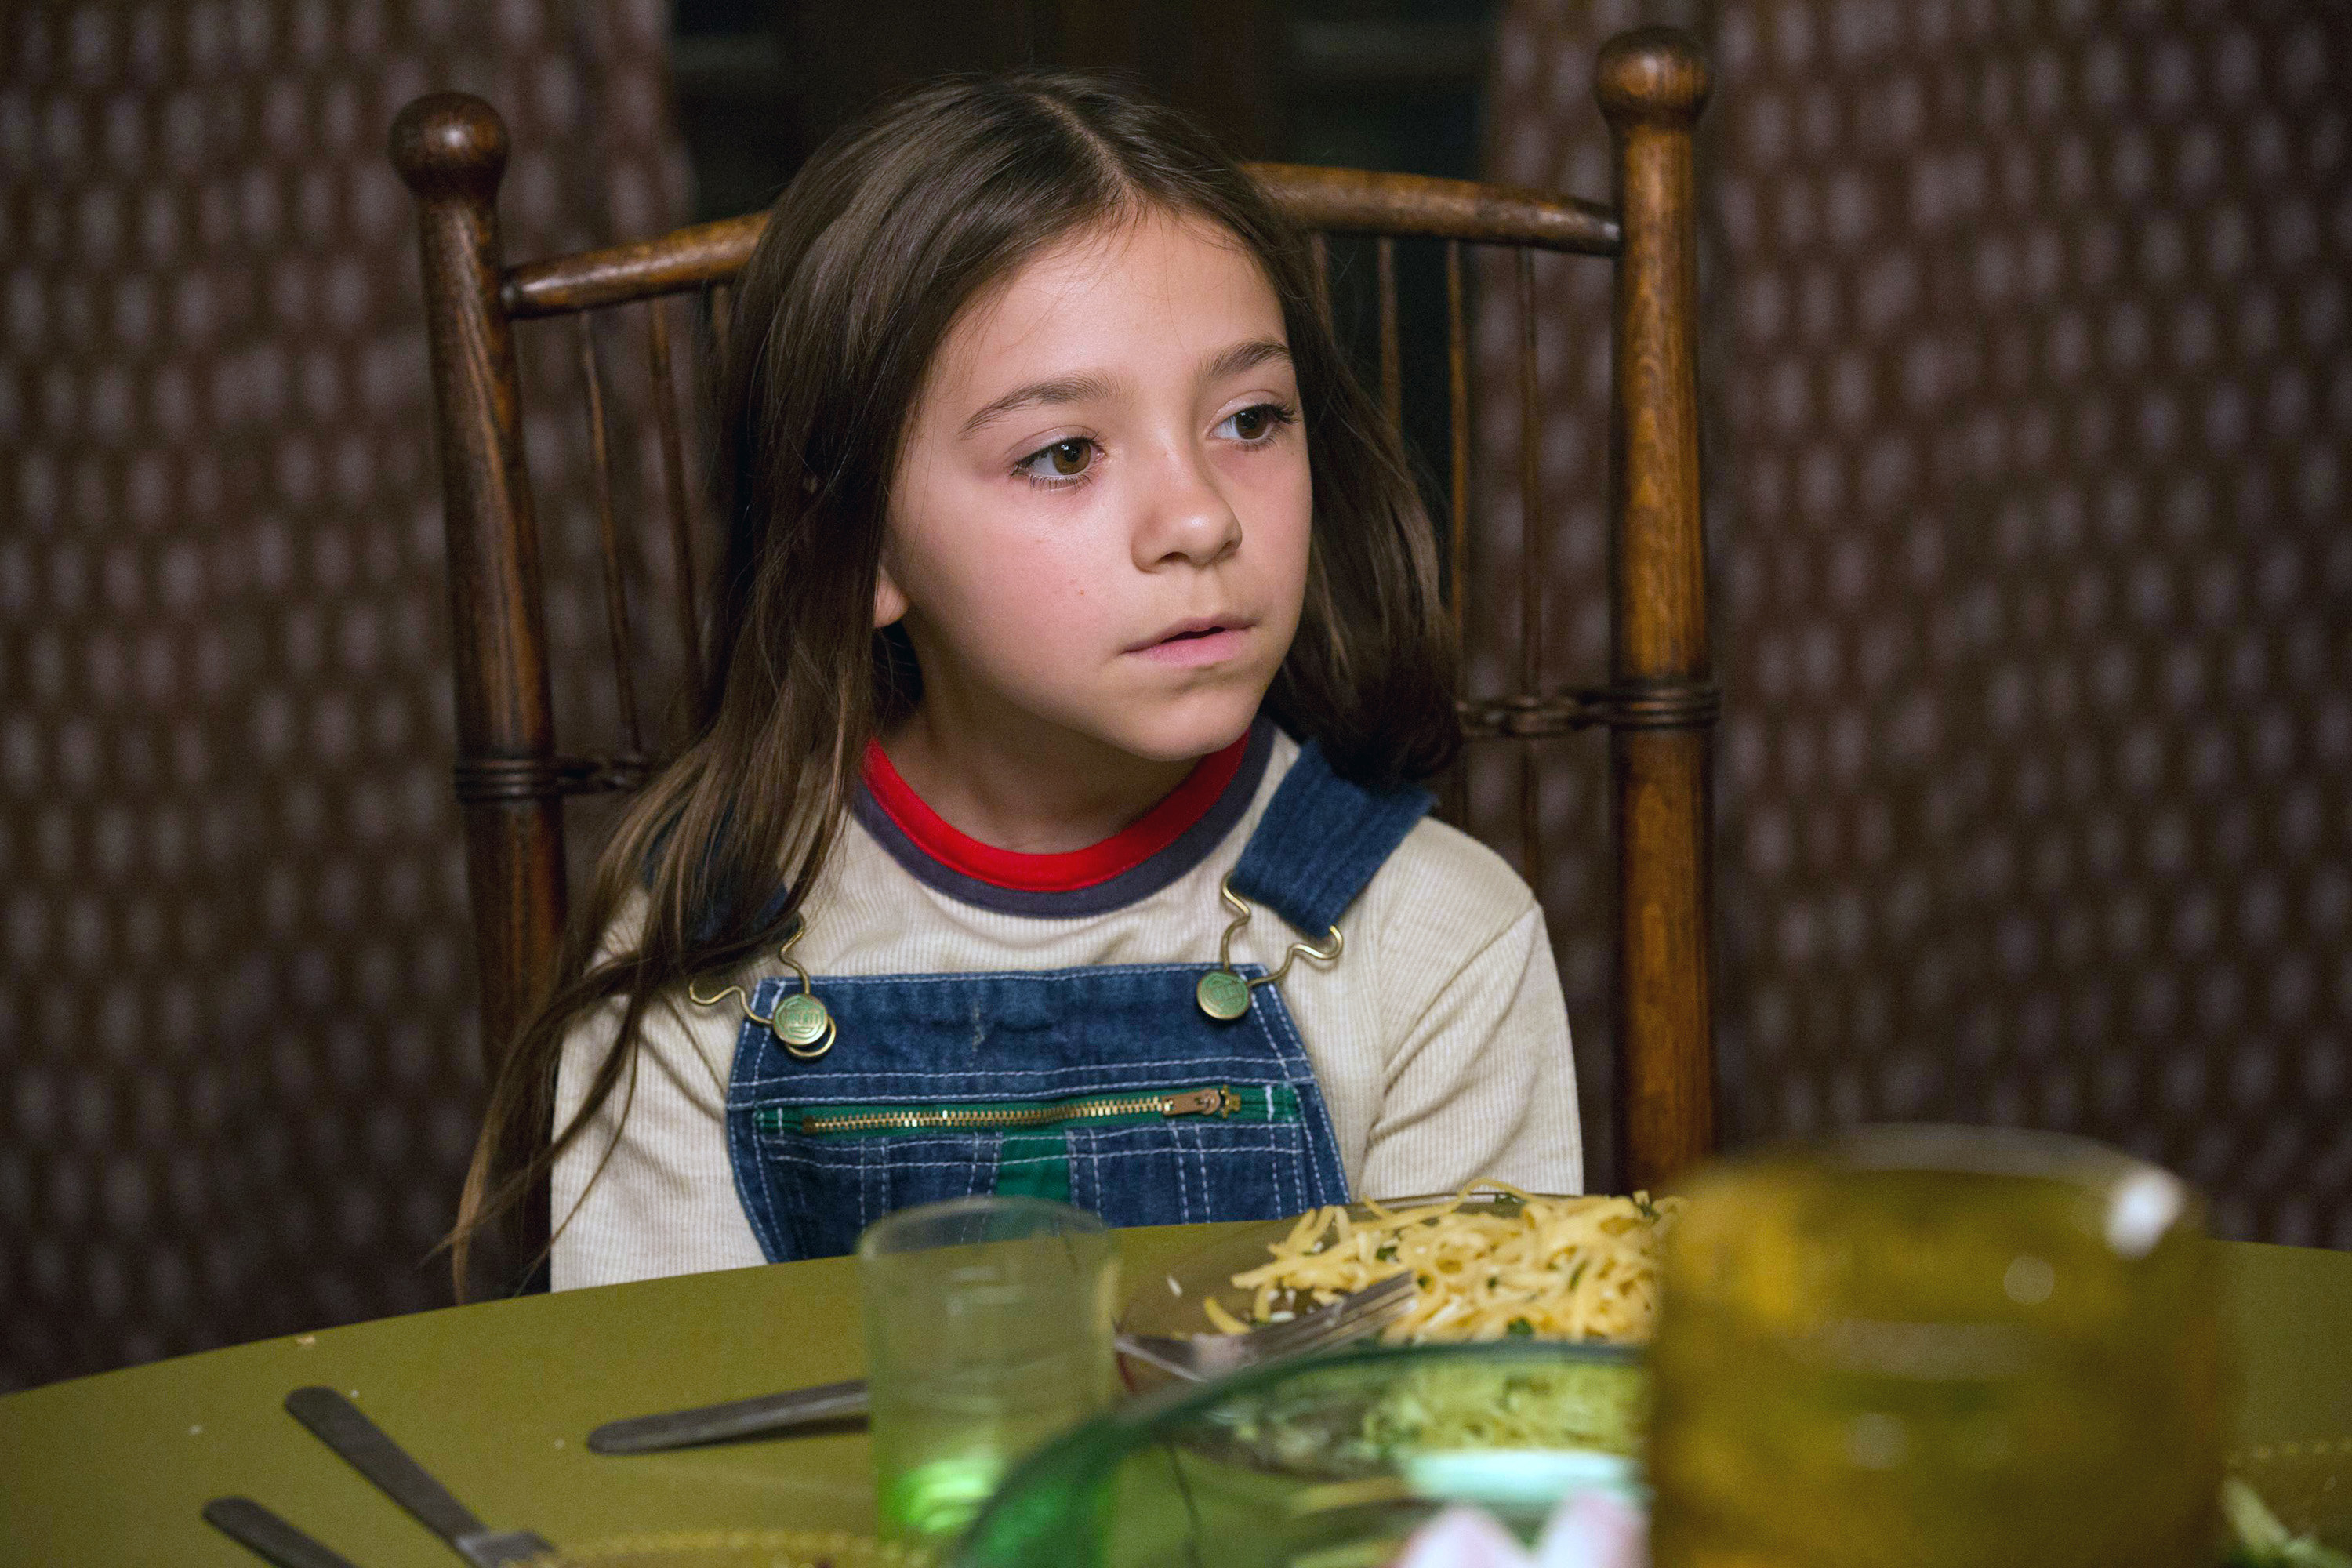 Young Olivia Edward as Duke in Better Things, wearing overalls at a table